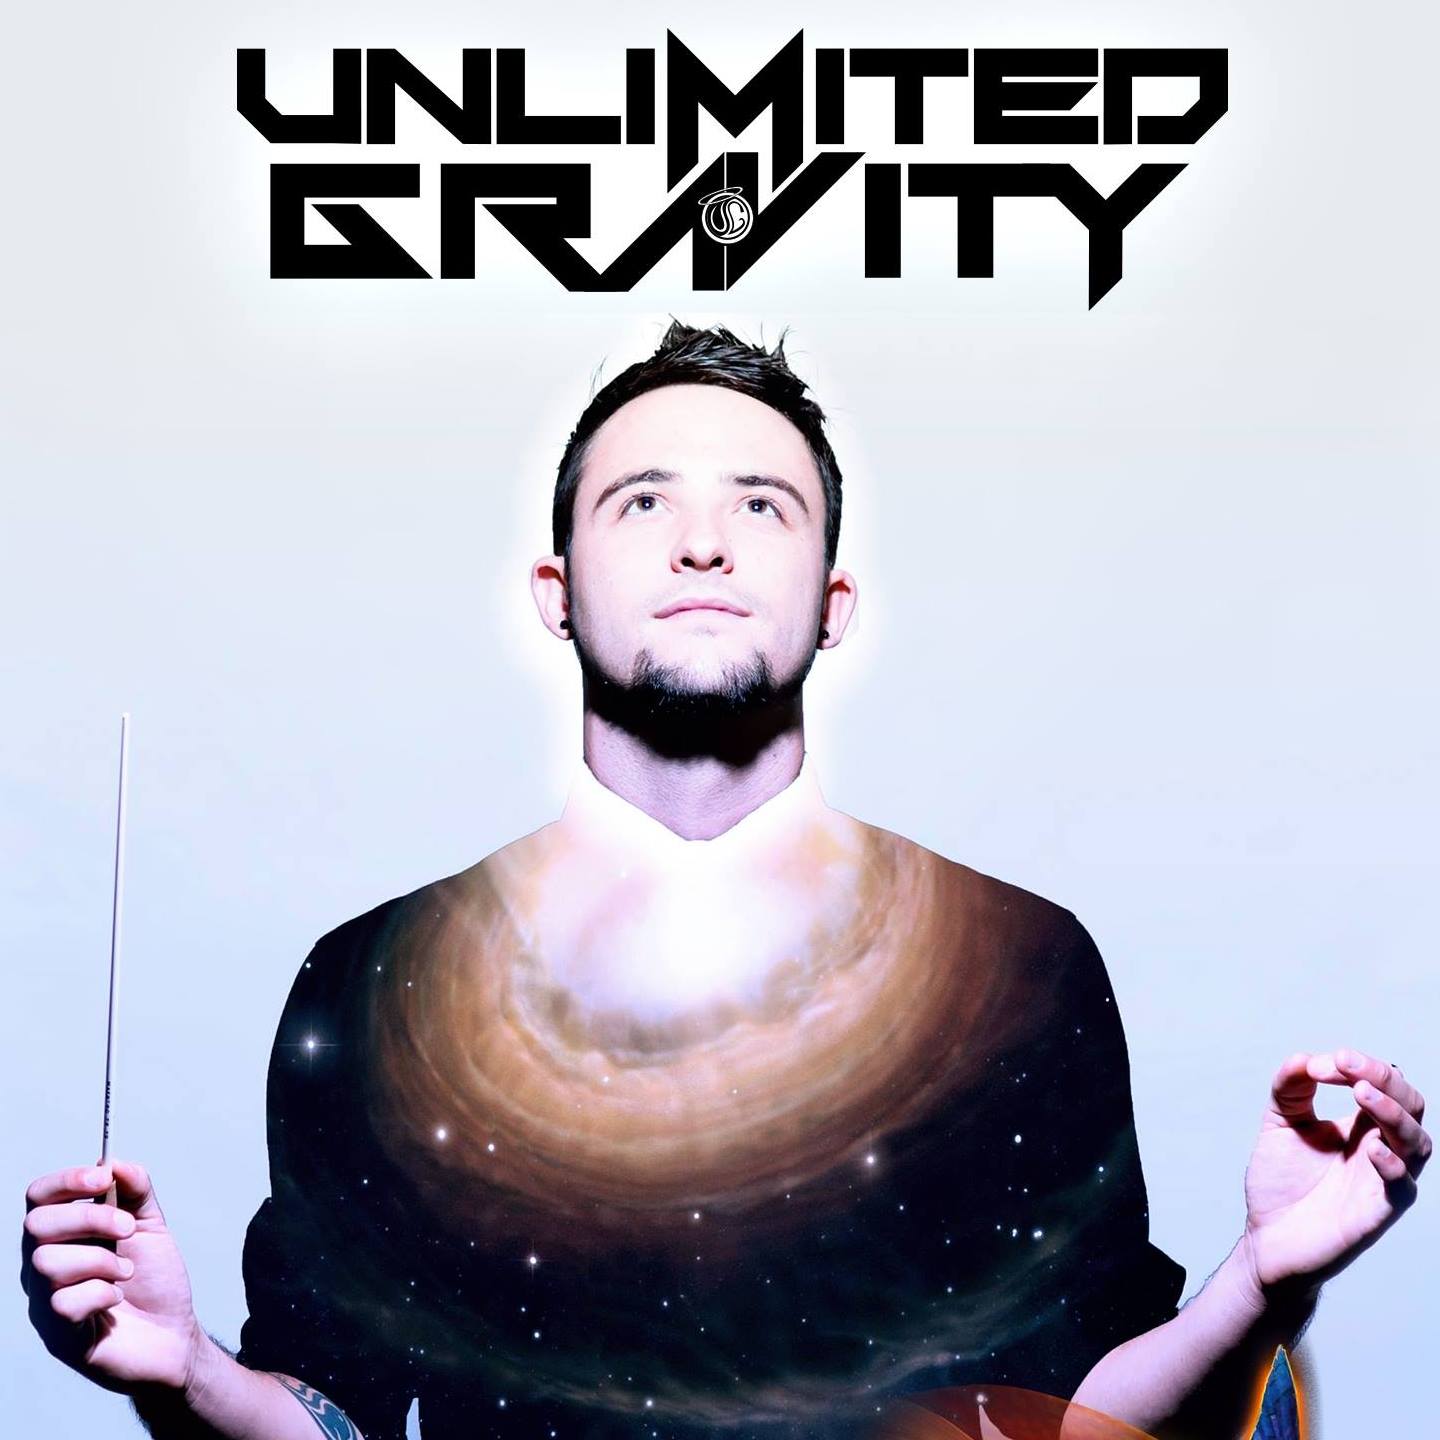 Unlimited Gravity